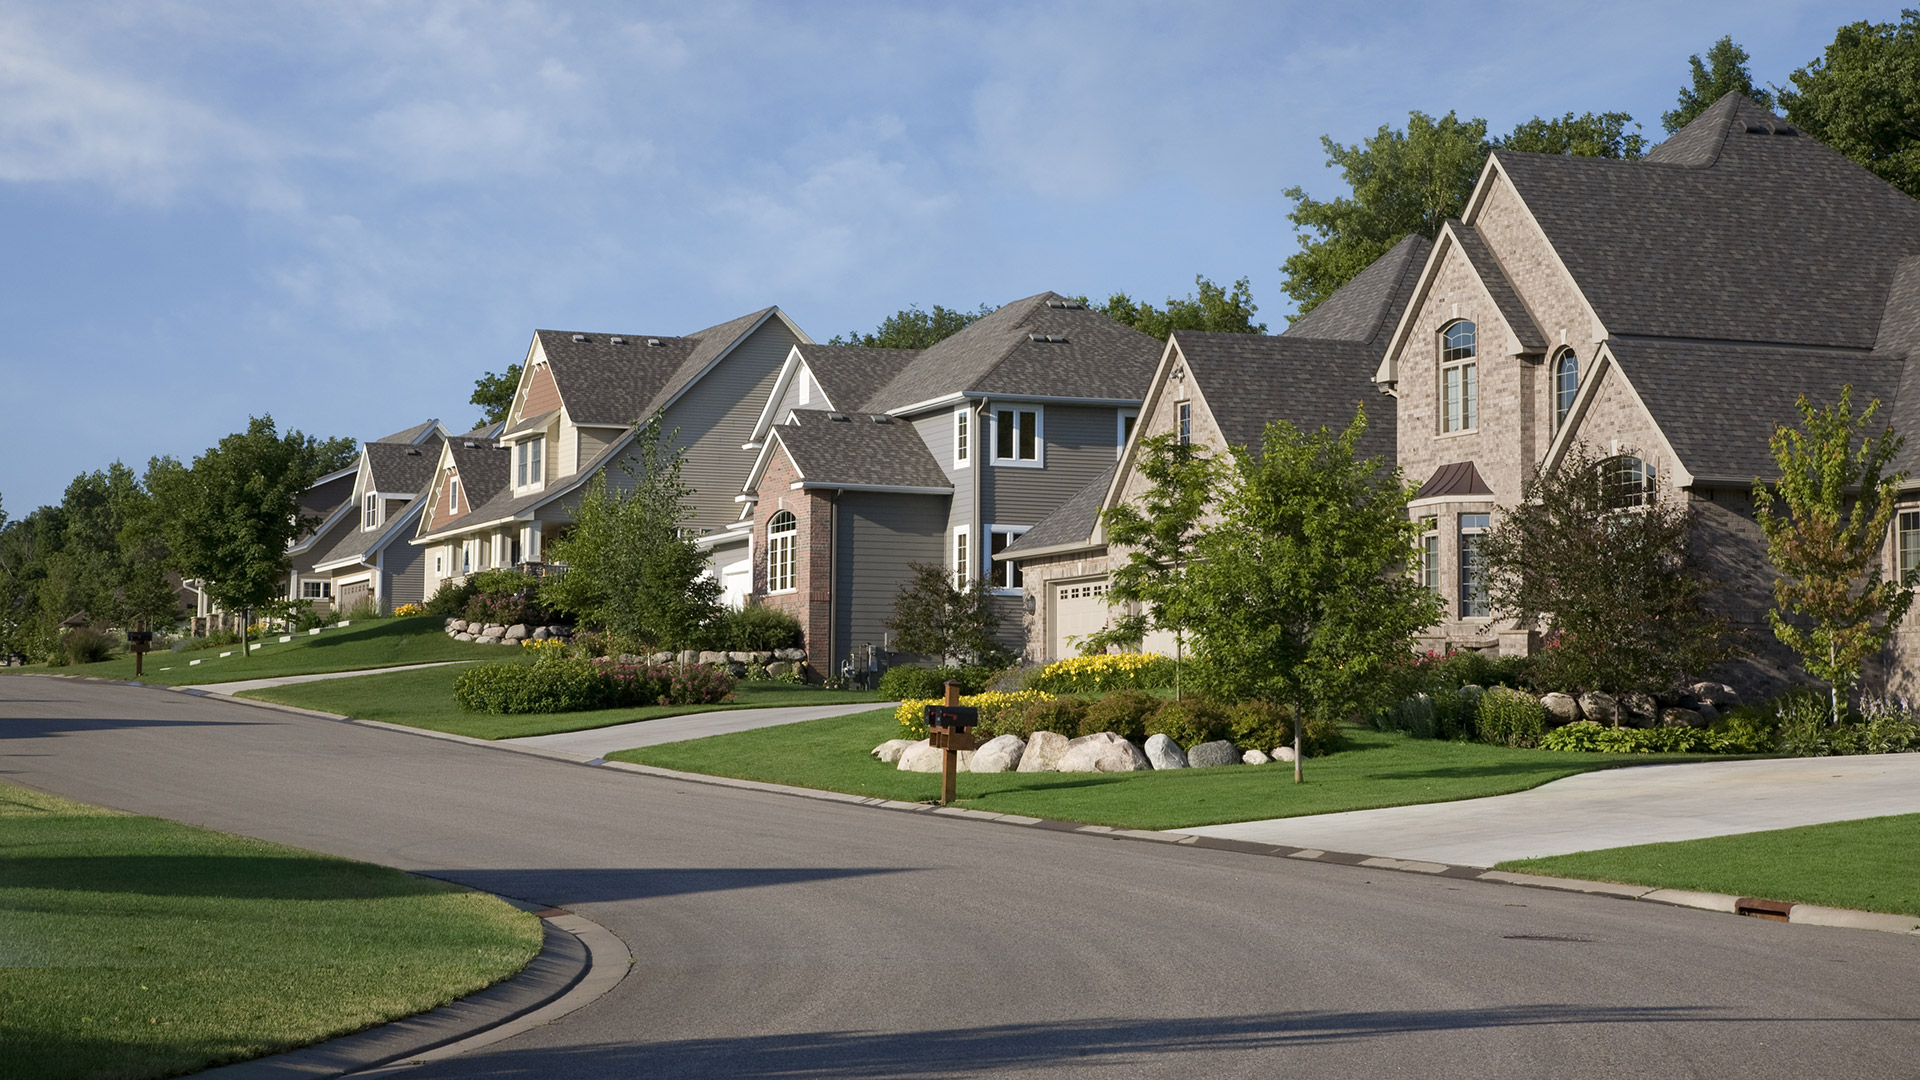 A neighborhood in Sachse, TX with regular lawn and landscaping.